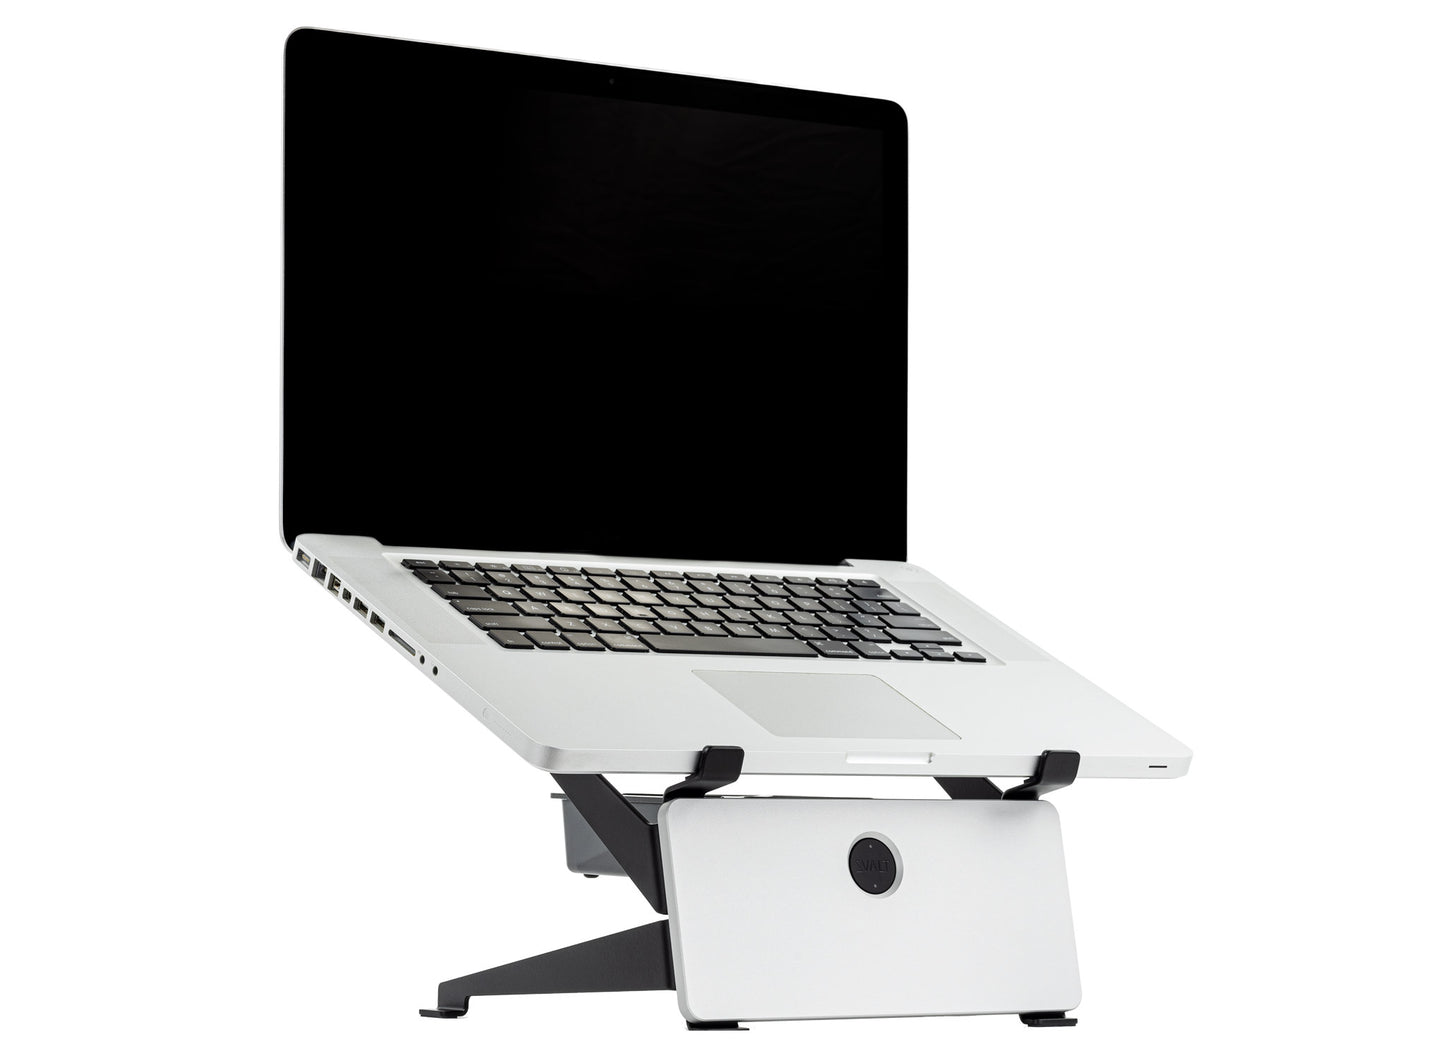 SVALT Cooling Stand model SRxB14 silver front side view for quiet fan cooling performance with Apple laptop MacBook Pro